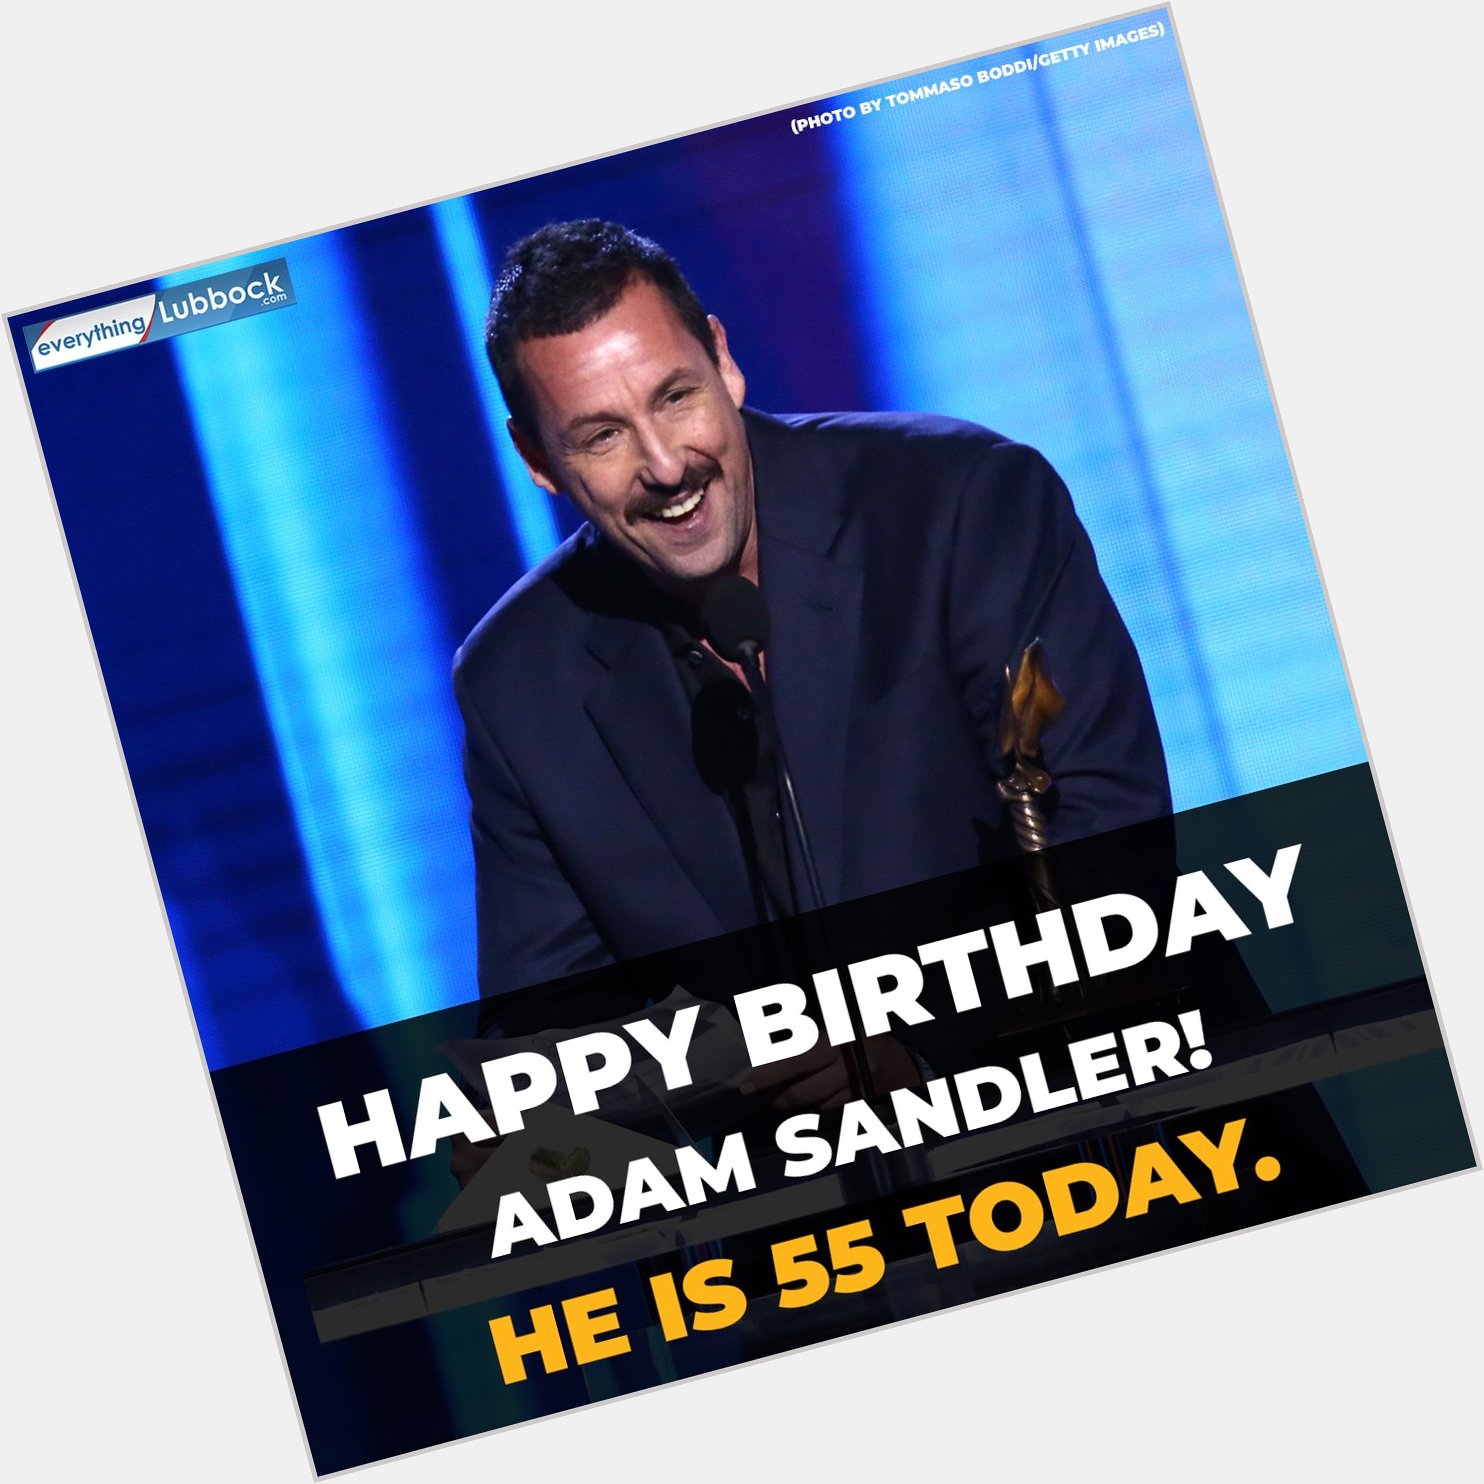 Happy Birthday to Adam Sandler! Tell us: What is YOUR favorite Adam Sandler movie? Leave it in the comments.  